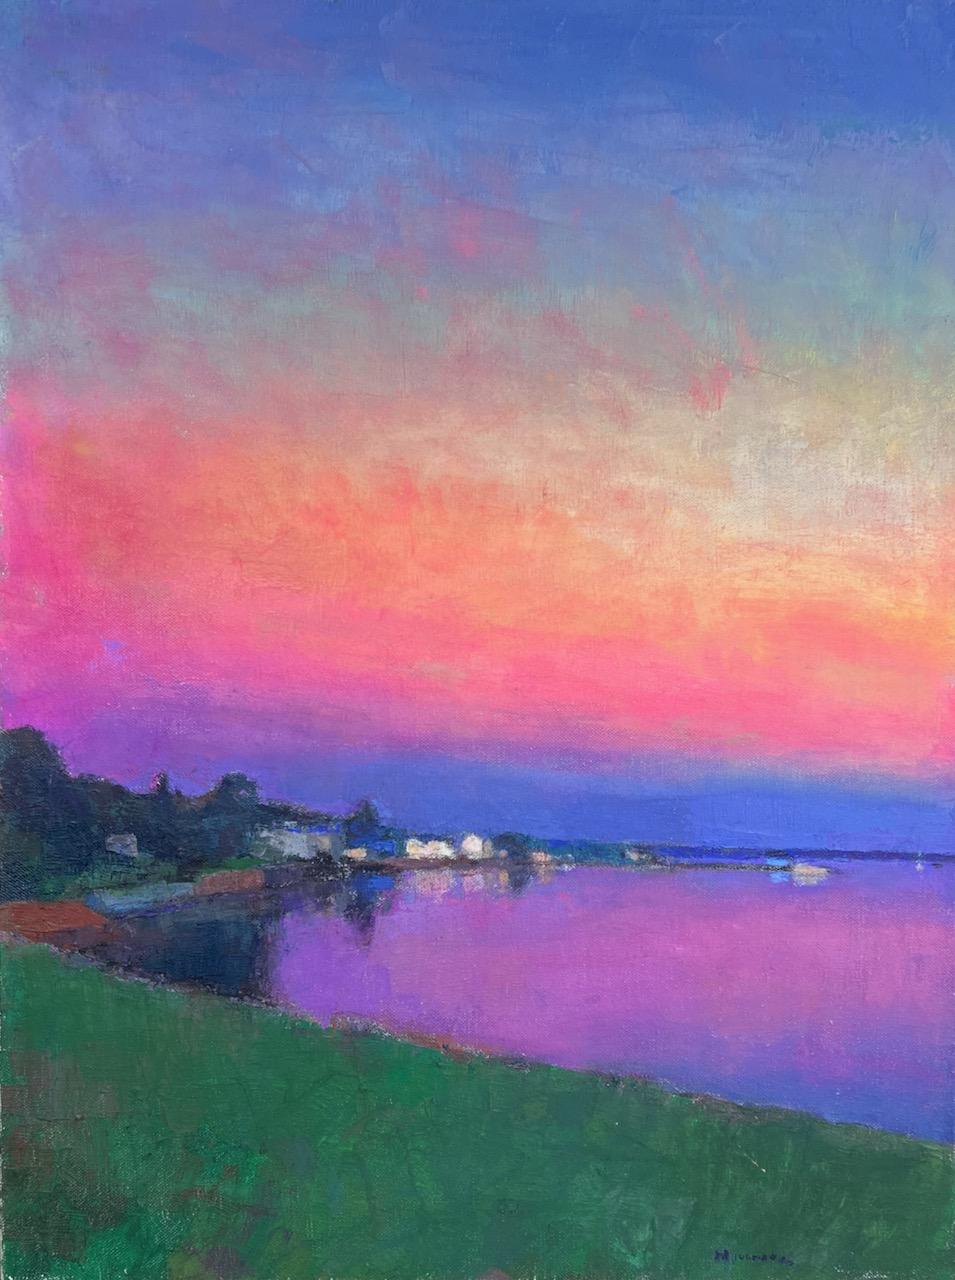 Larry Horowitz Landscape Painting - "Dusk Reflections" oil painting of a vibrant pink sunset over water